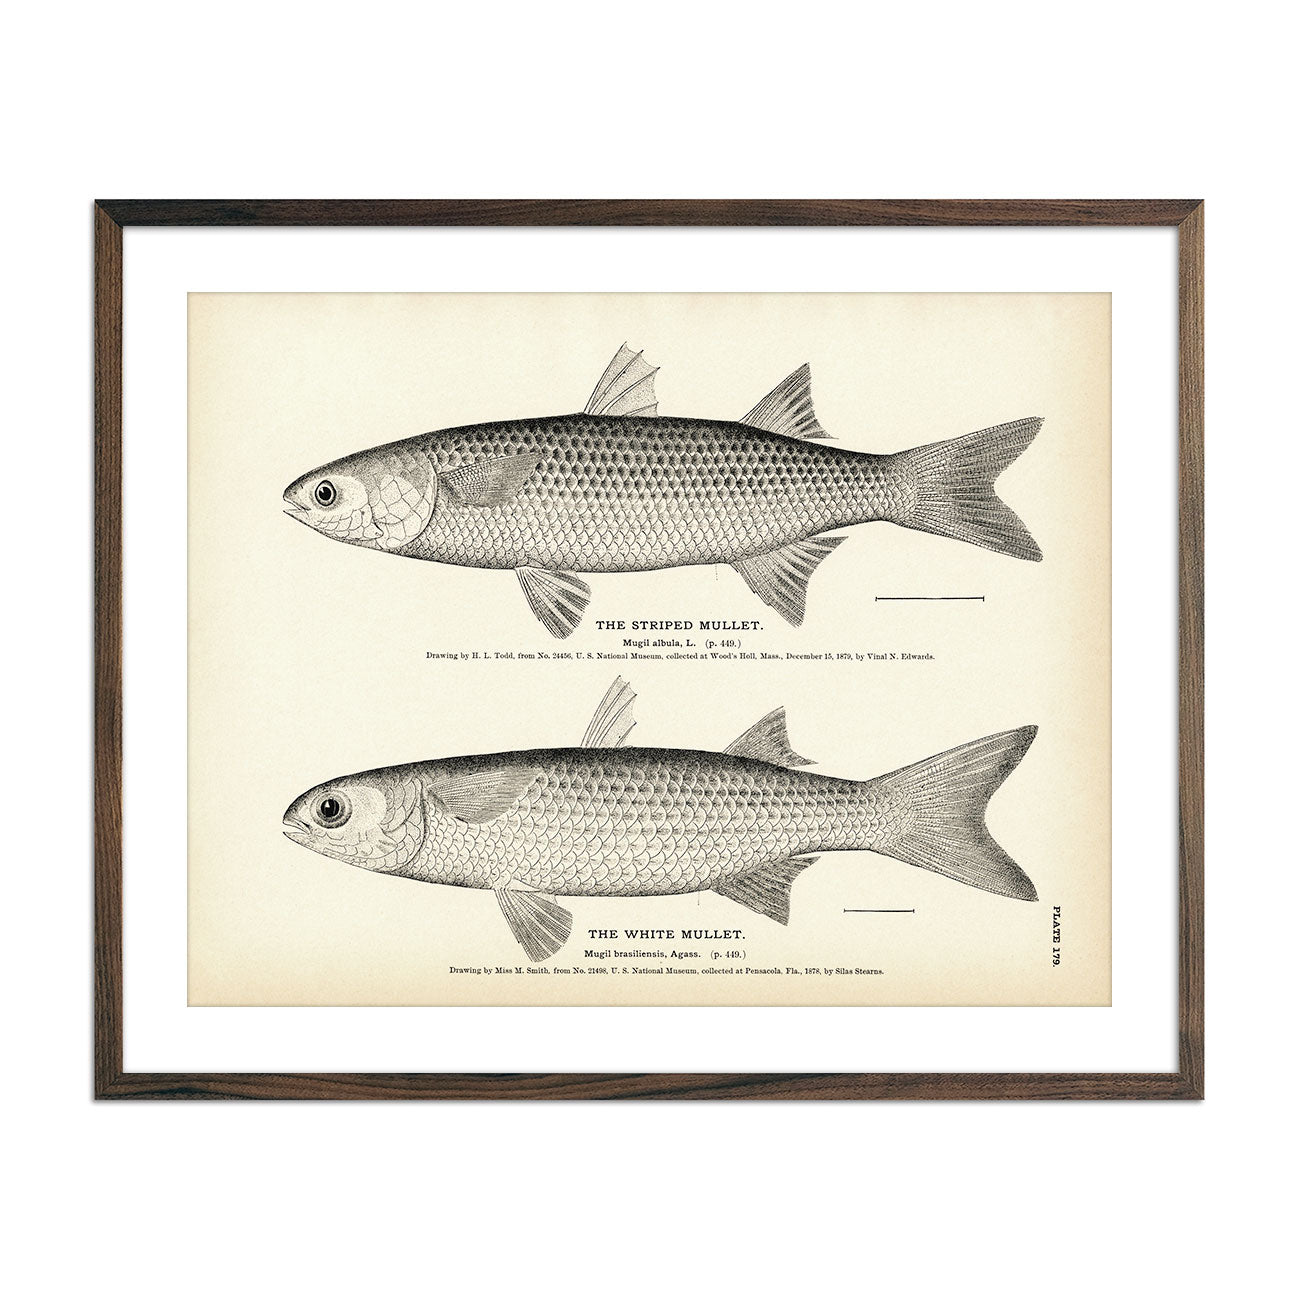 Vintage Striped and White Mullet fish print